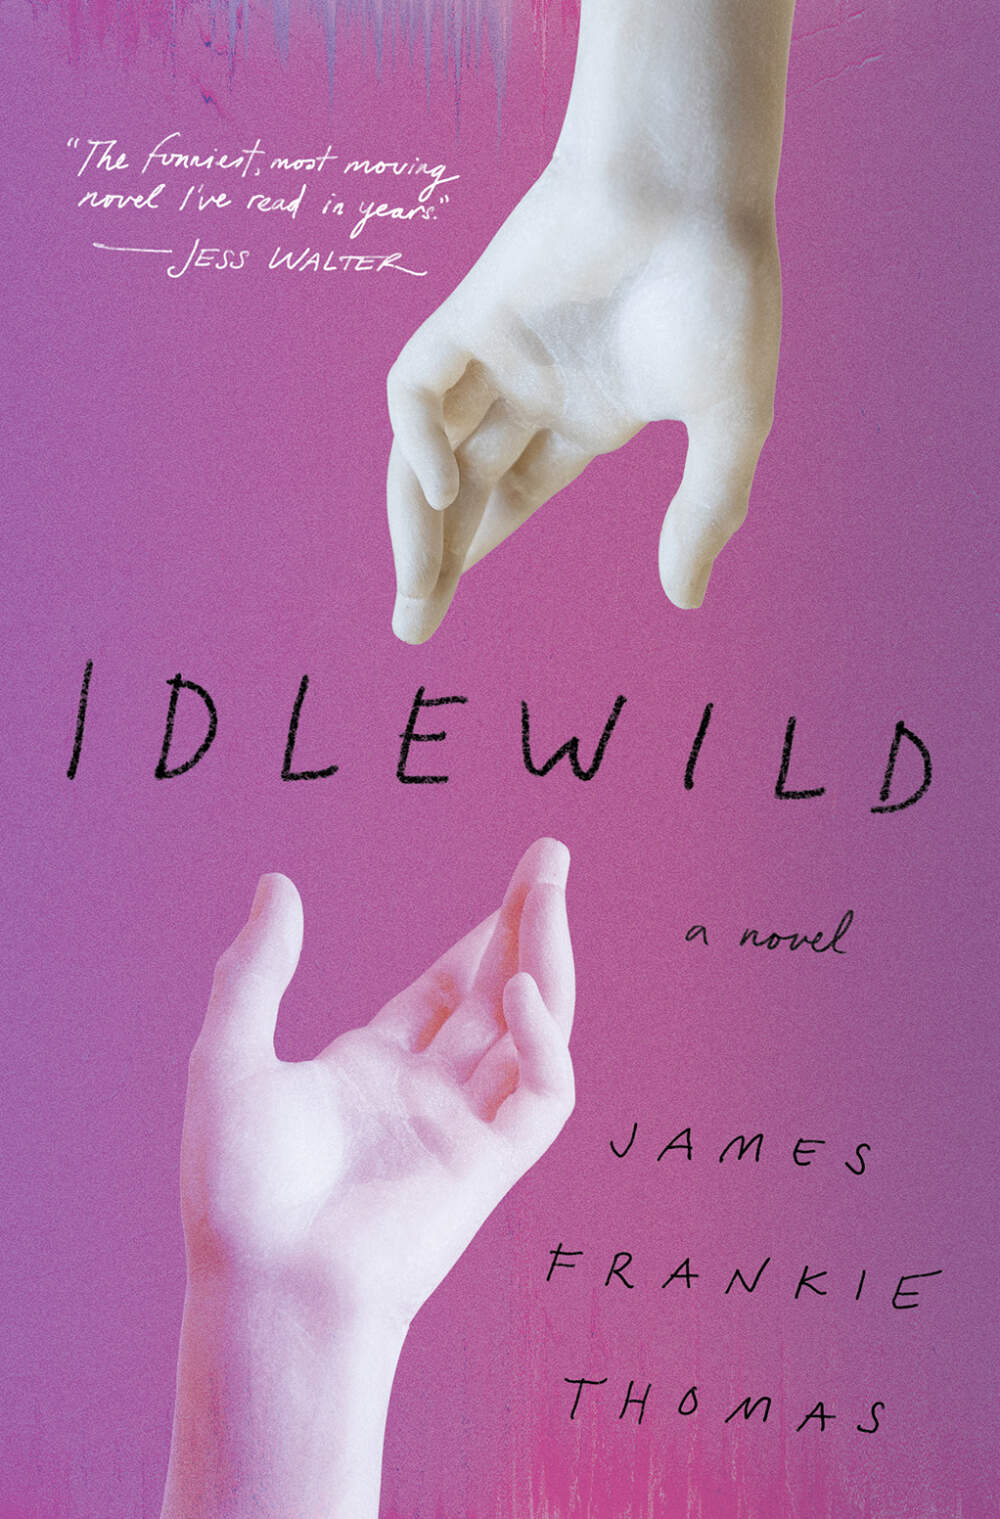 The cover of "Idlewild" by James Frankie Thomas. (Courtesy)